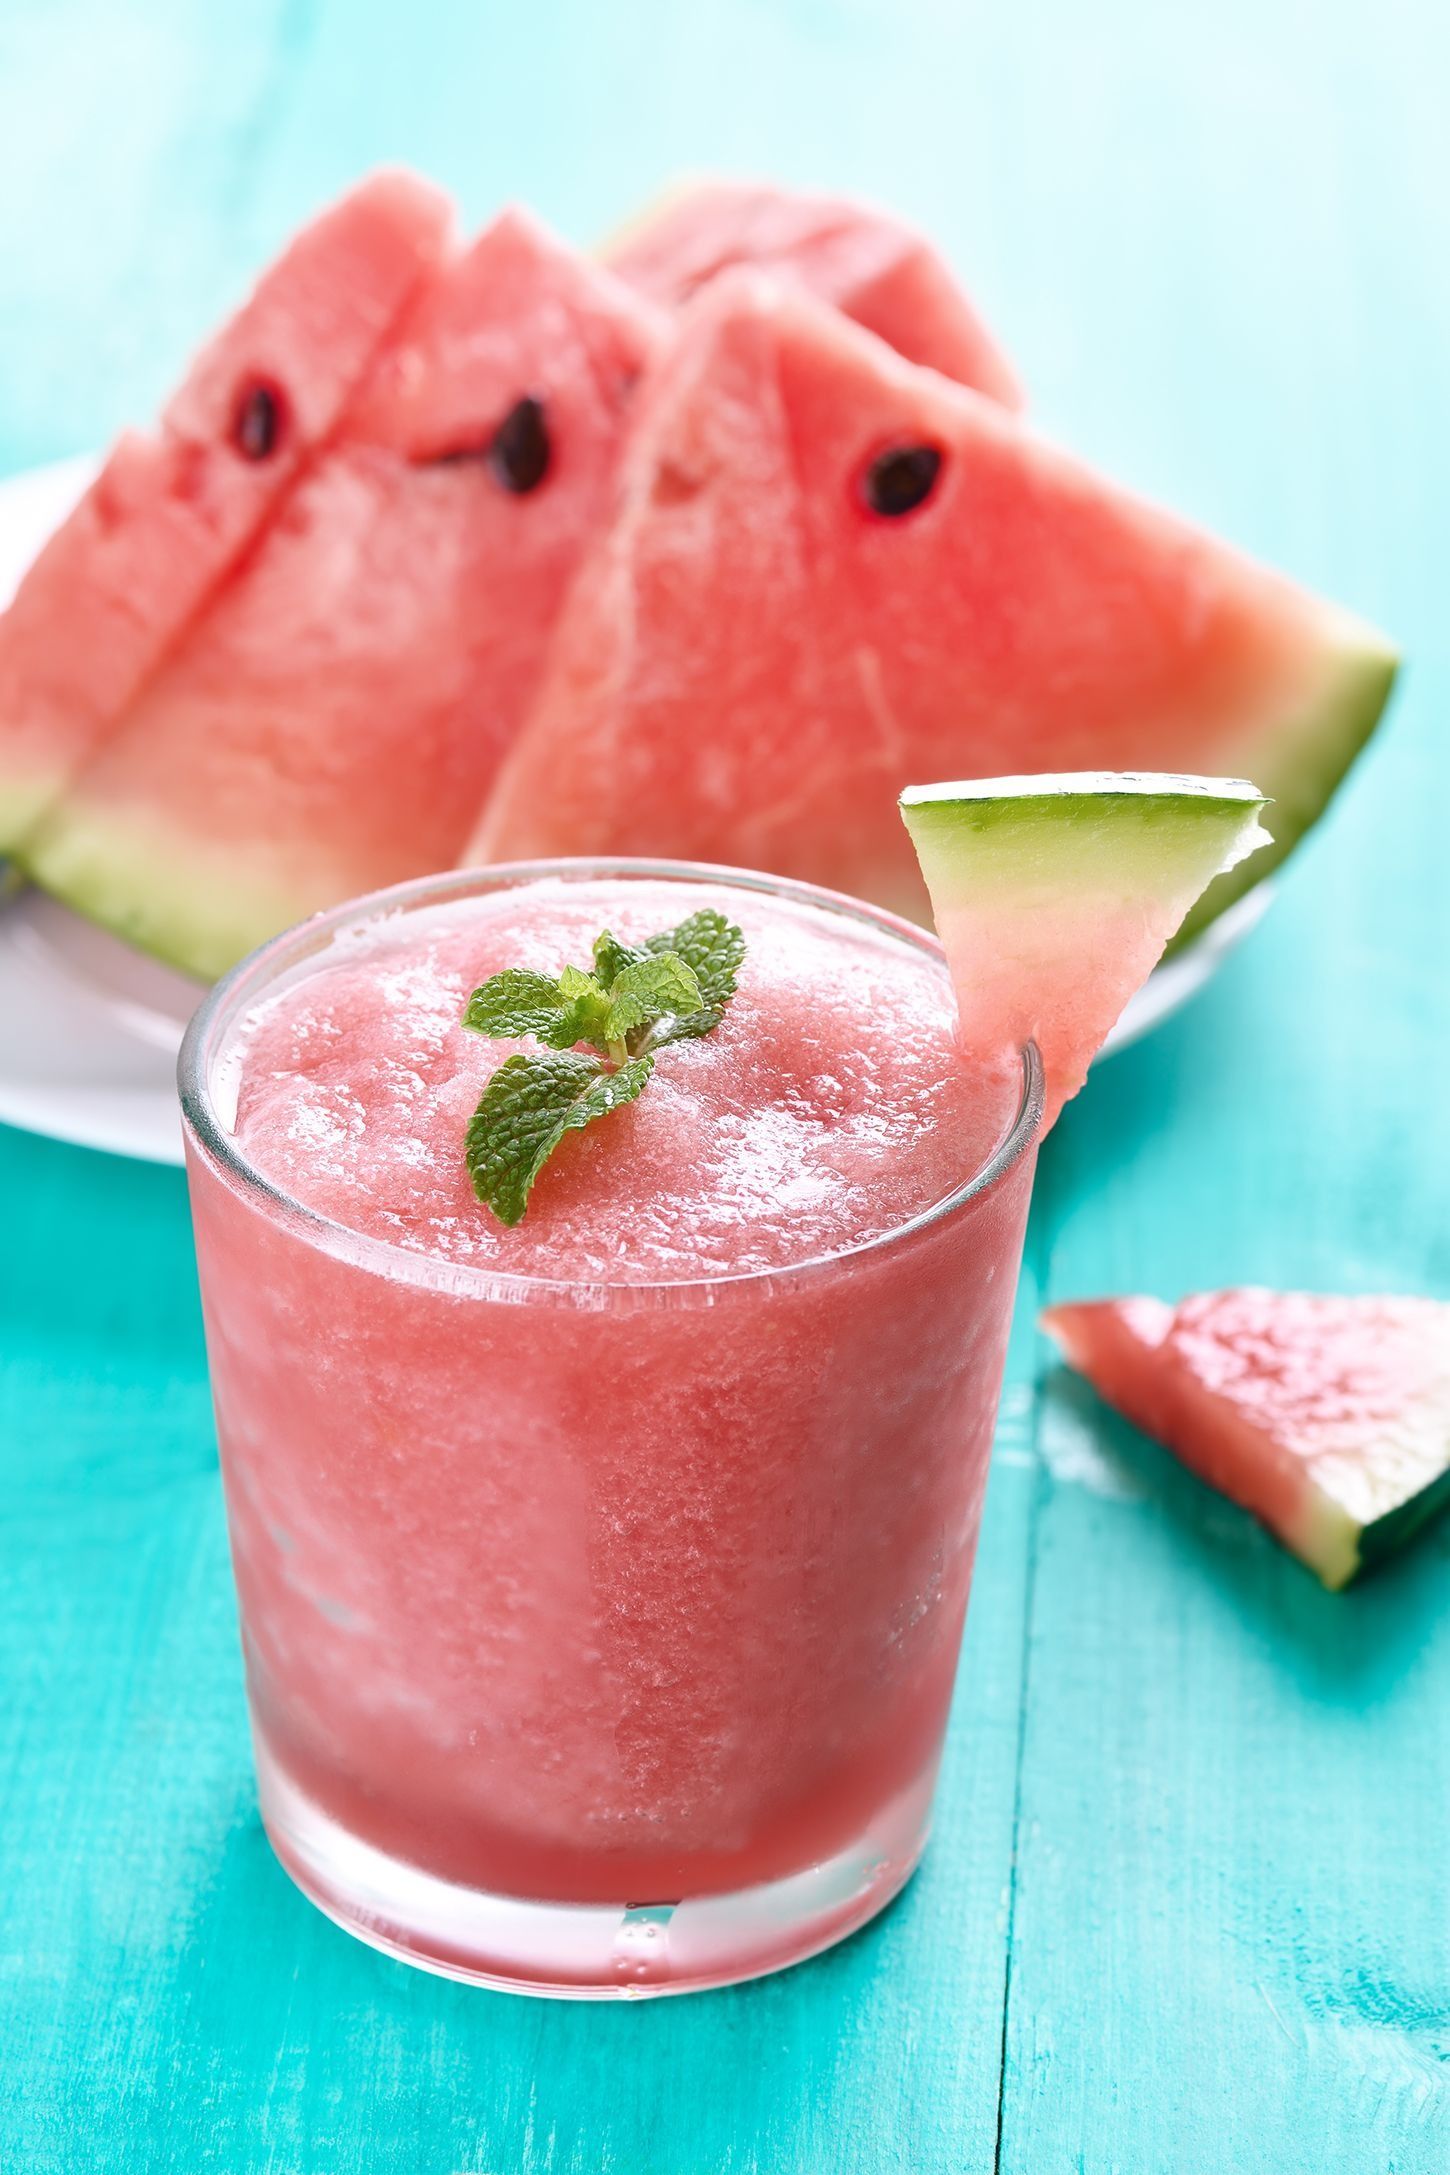 20 Best Frozen Alcoholic Drinks - How to Make Frozen Cocktails